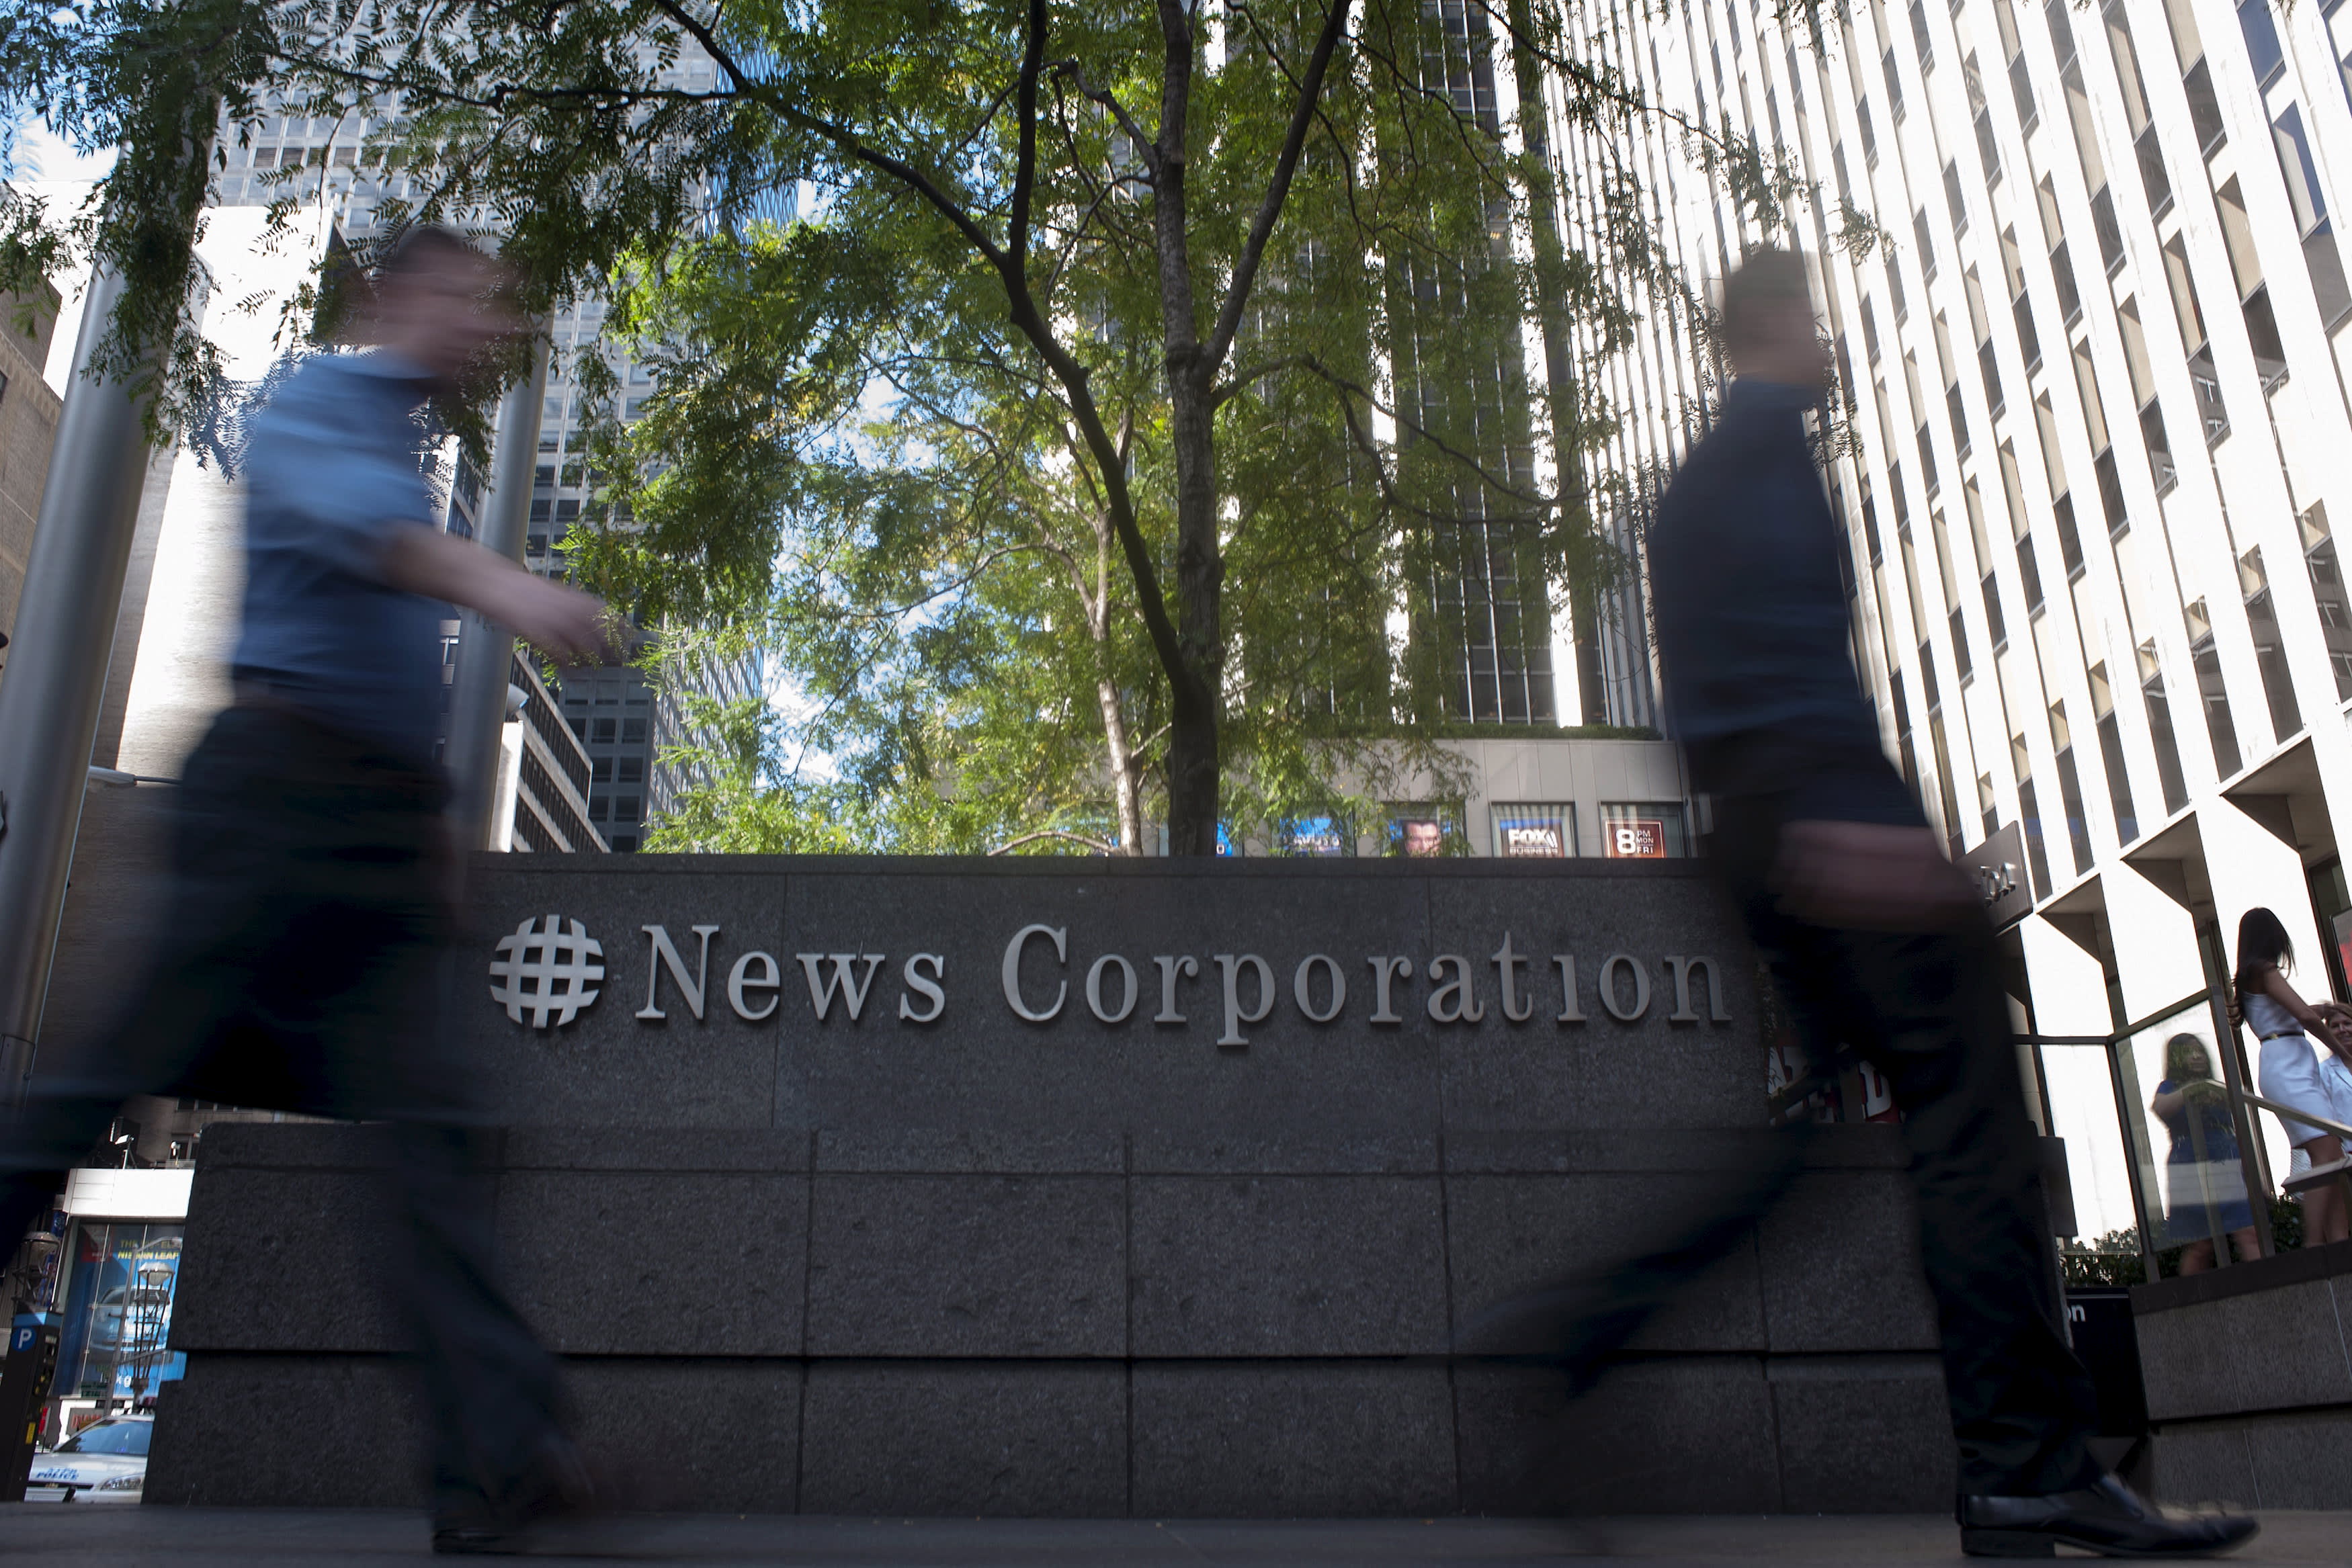 News Corp, owner of Wall Street Journal, halts nonessential travel for employees due to coronavirus